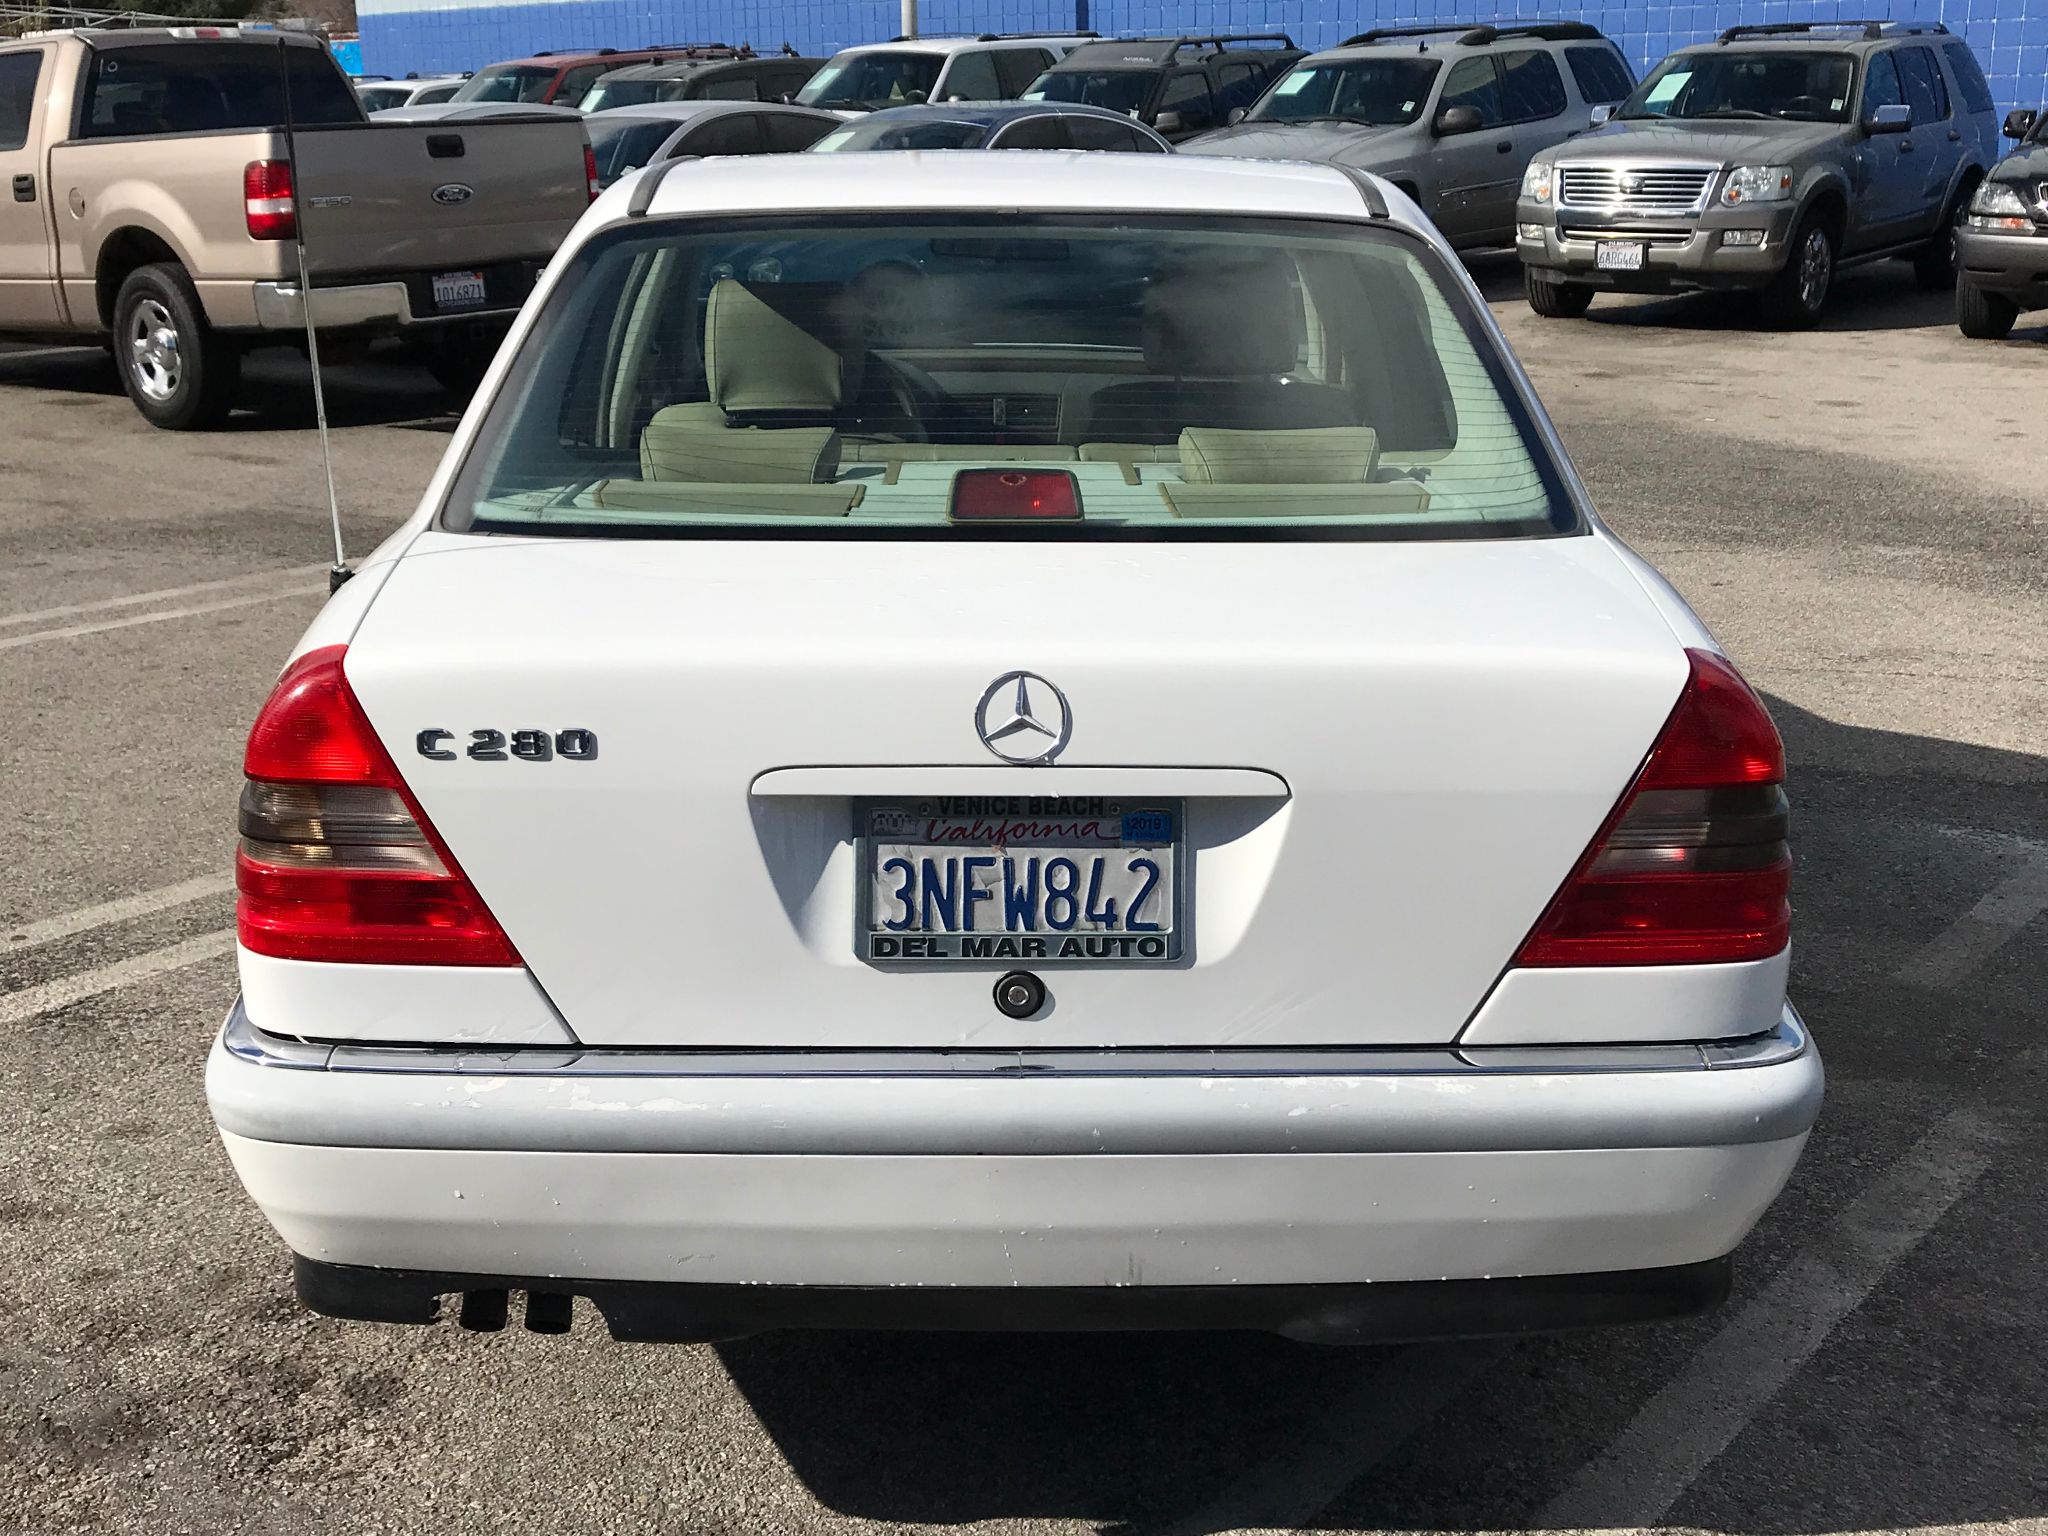 Used 1995 Mercedes-Benz C Class 2.8L at City Cars ...